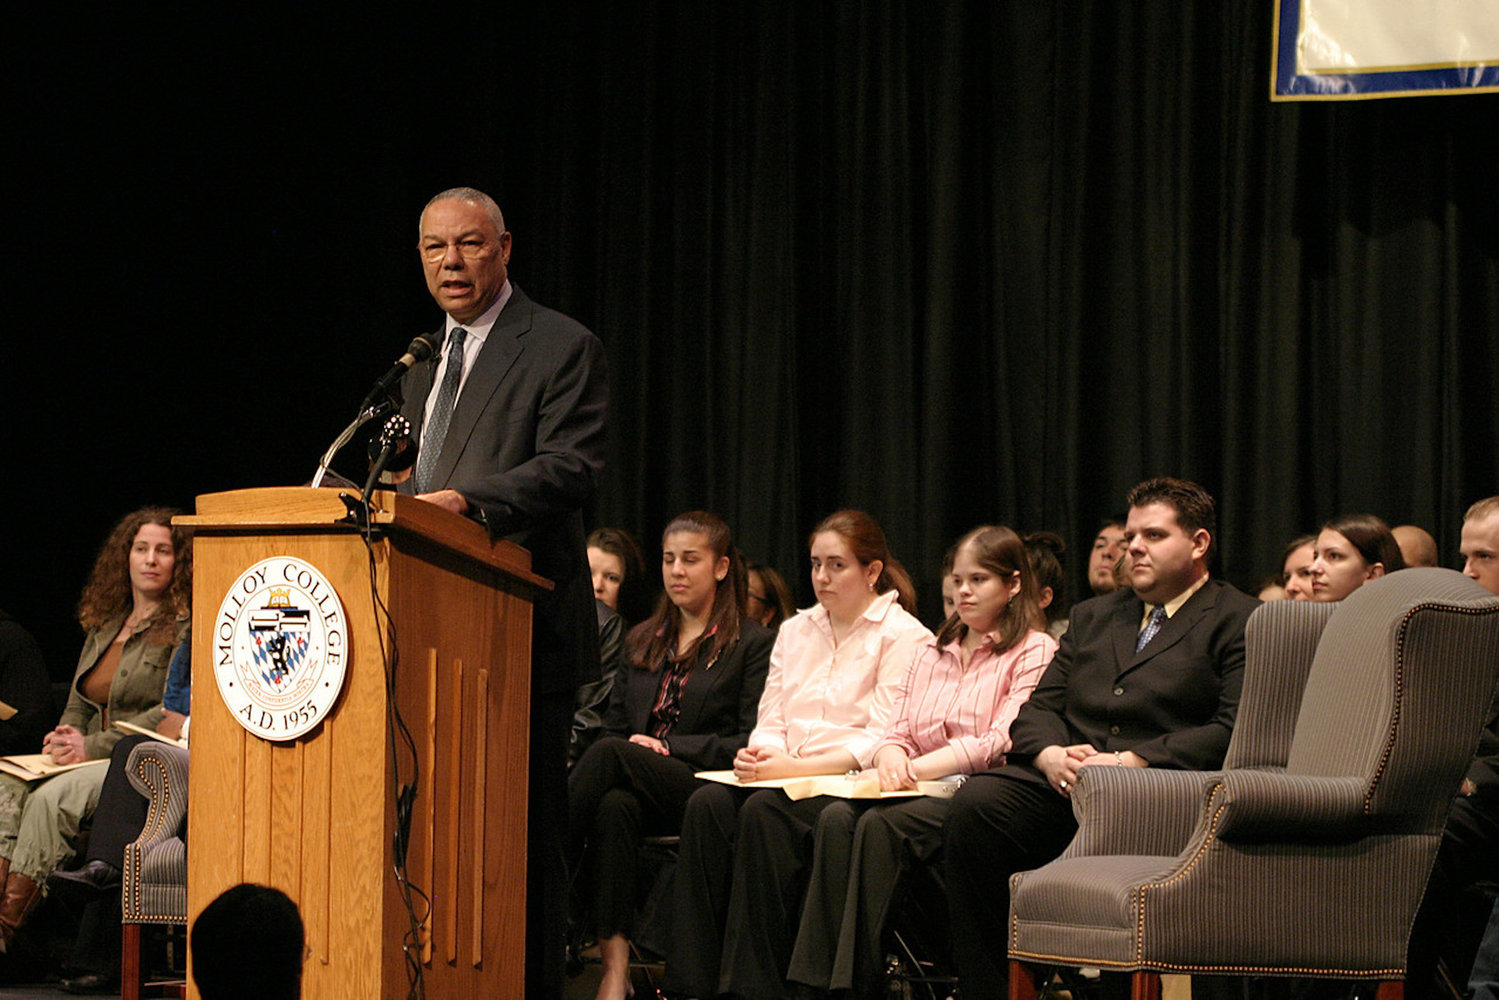 Late former Secretary of State Colin Powell visited Molloy College in 2005.